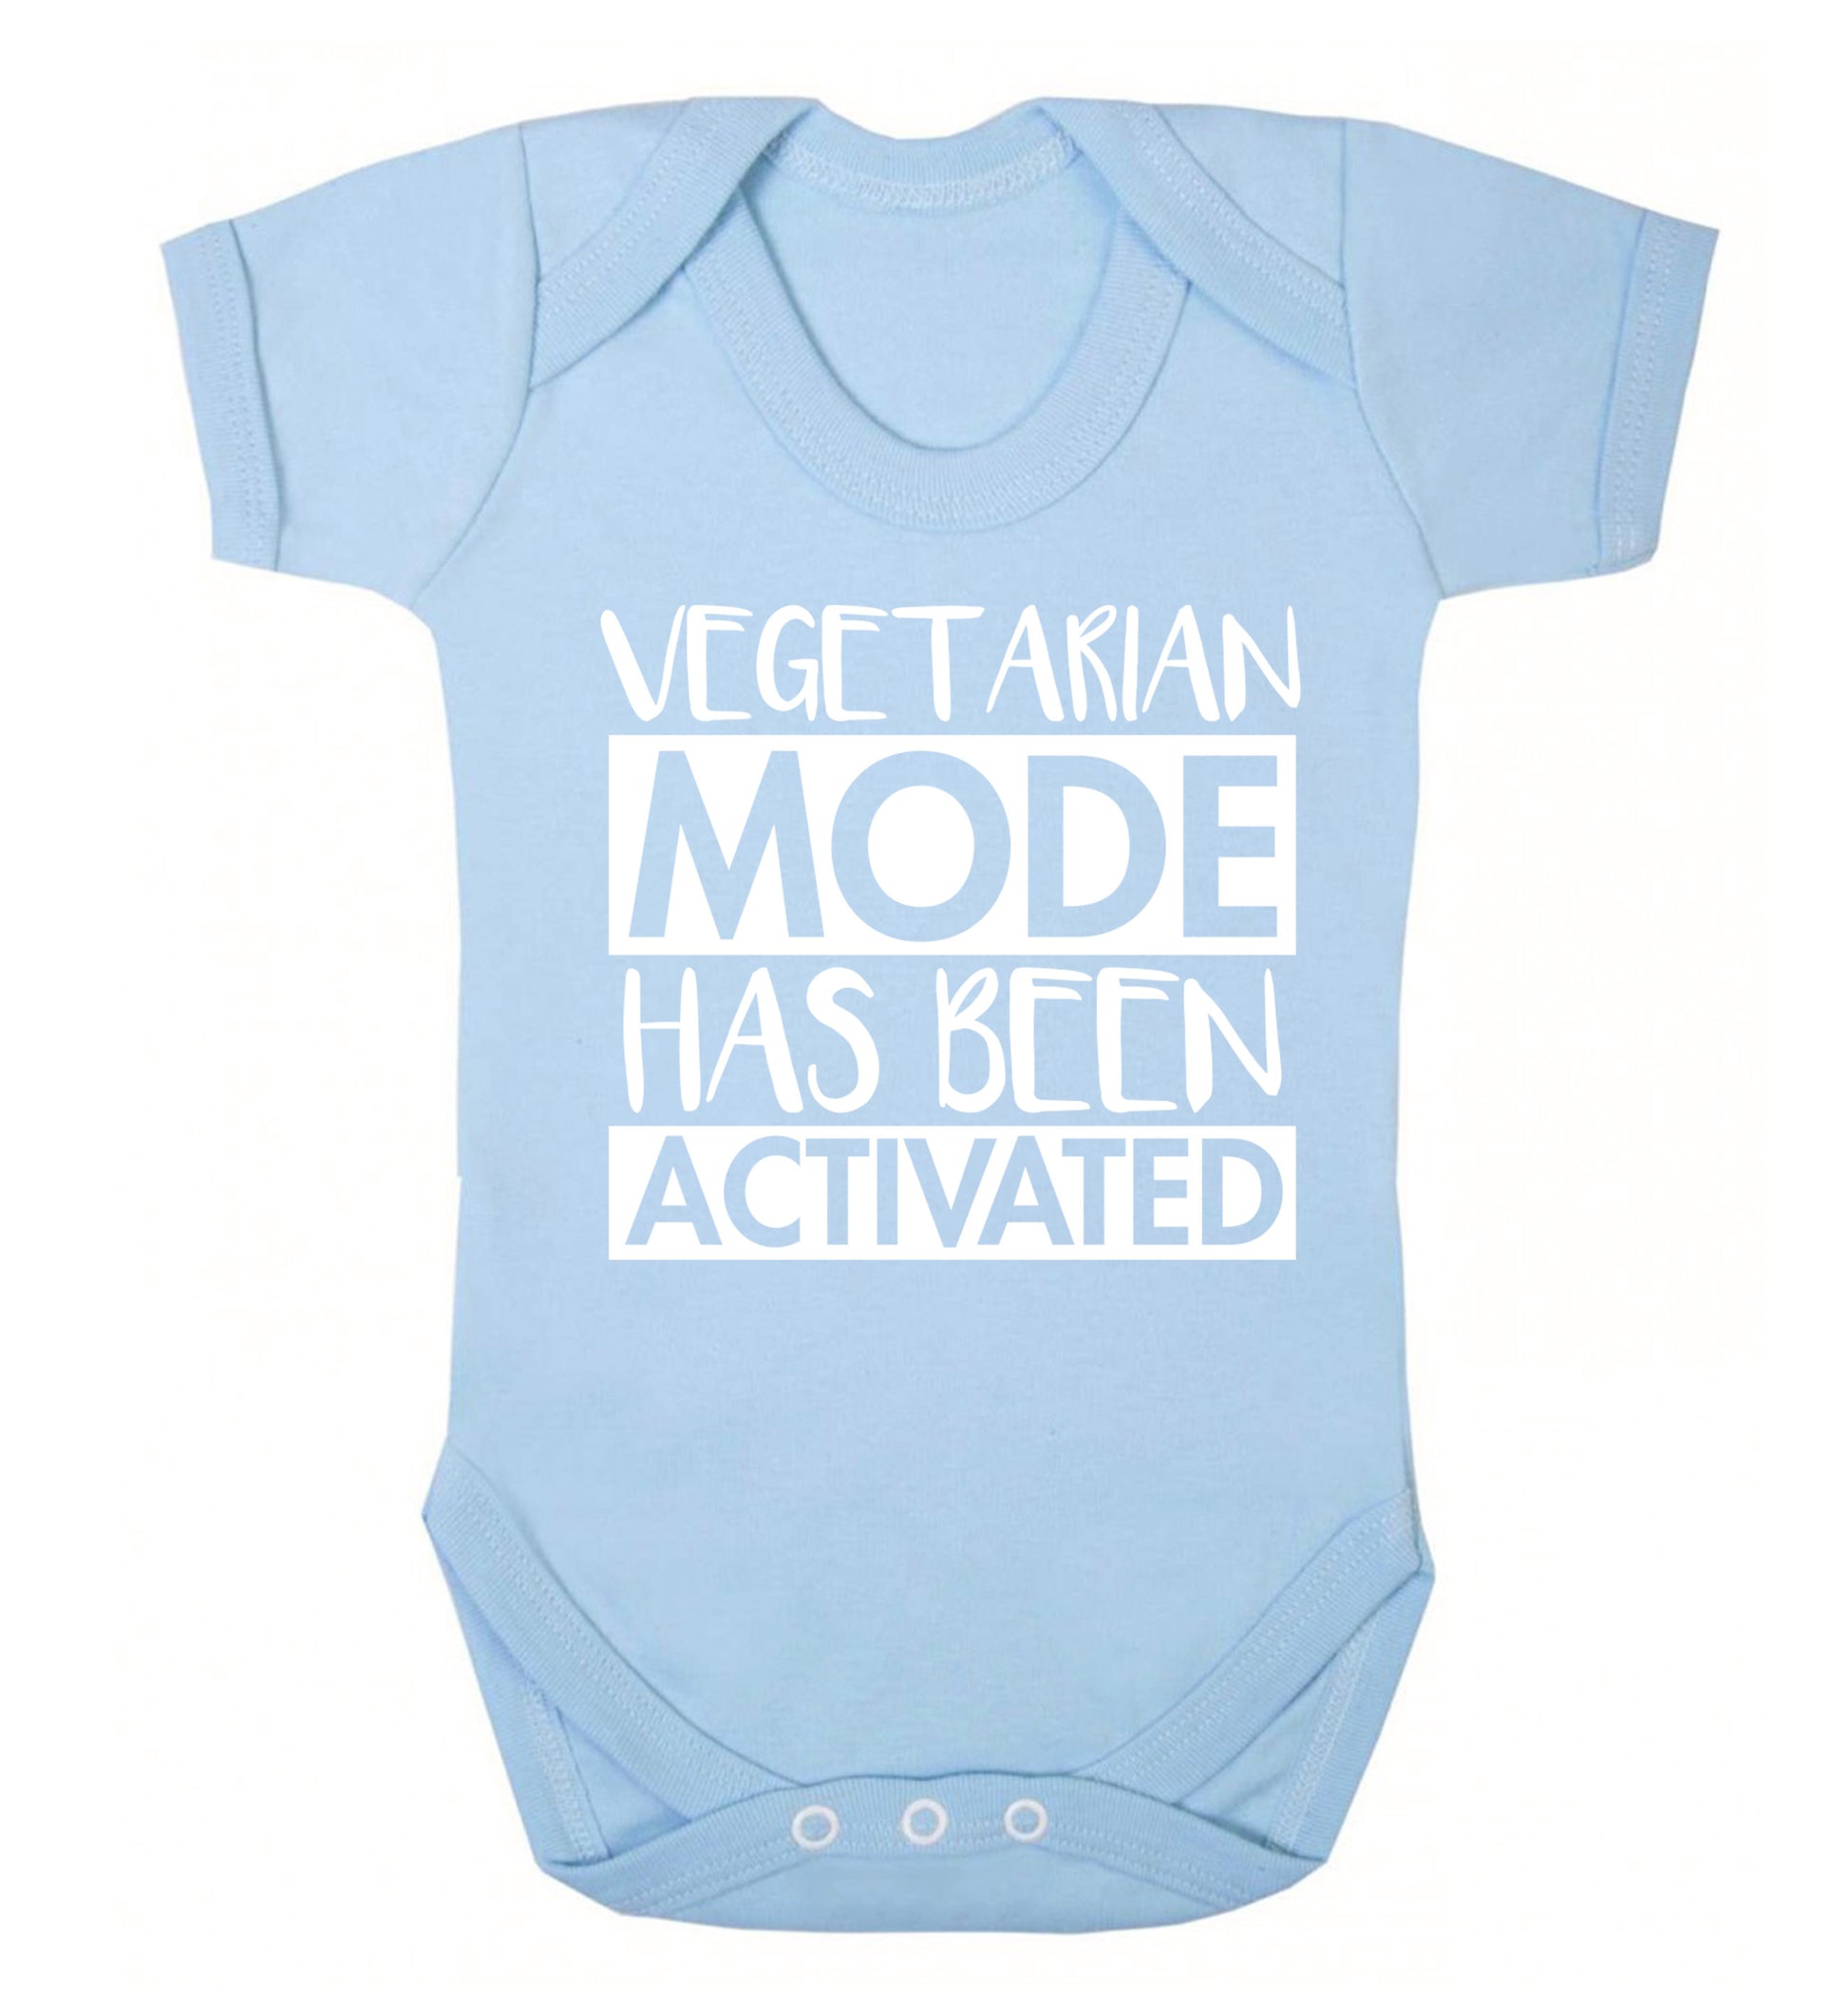 Vegetarian mode activated Baby Vest pale blue 18-24 months